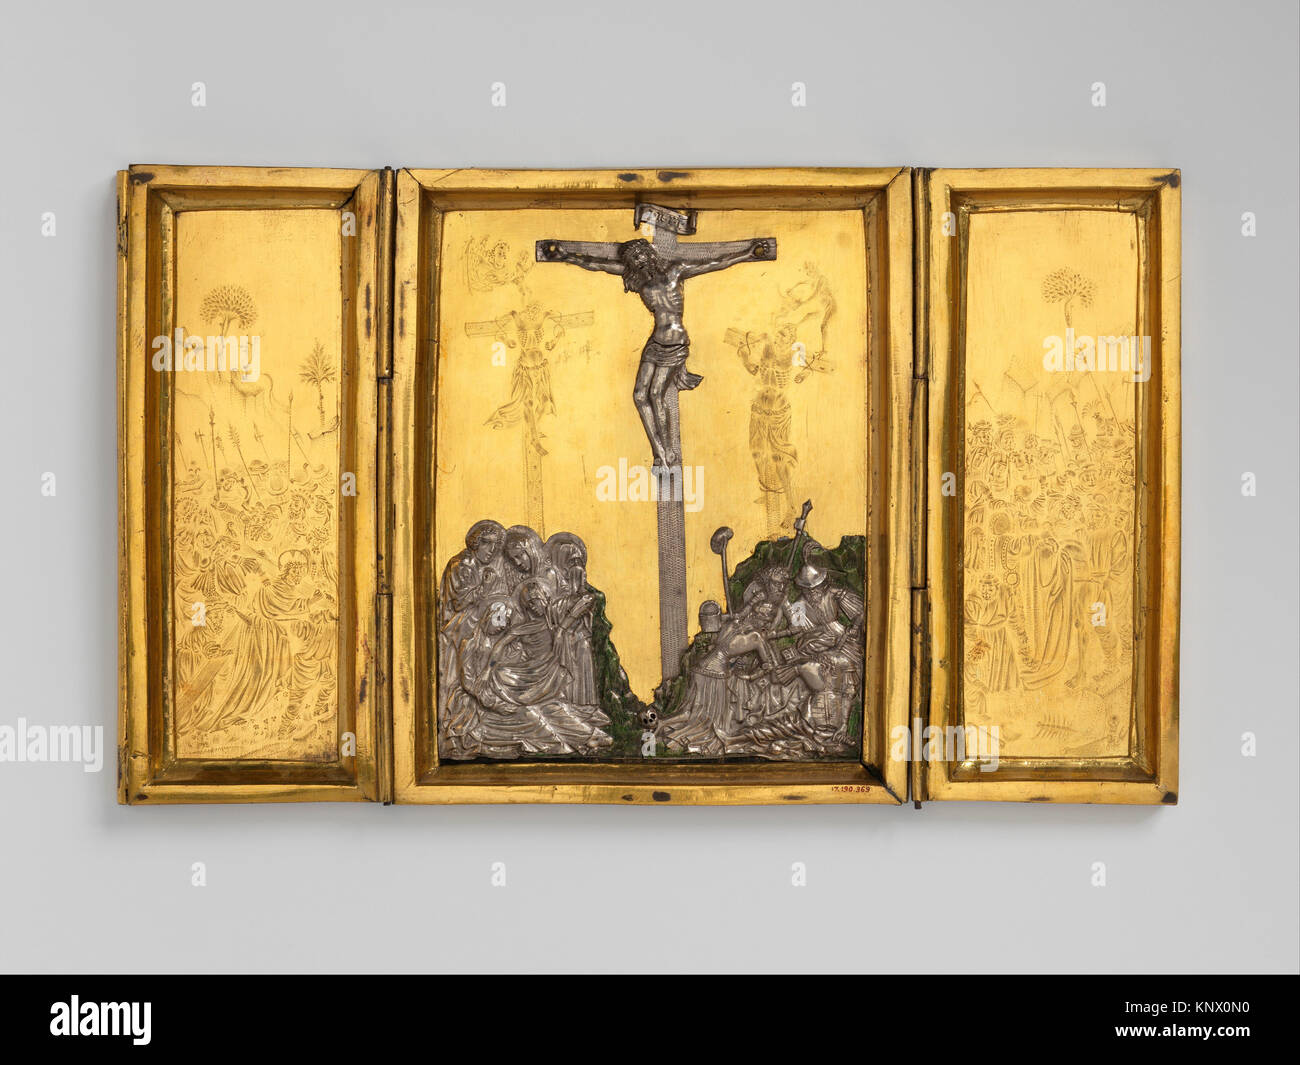 Triptych with the Way to Calvary, the Crucifixion, and the Disrobing of Jesus. Date: ca. 1400-1420; Culture: Netherlandish or French; Medium: Gilded Stock Photo